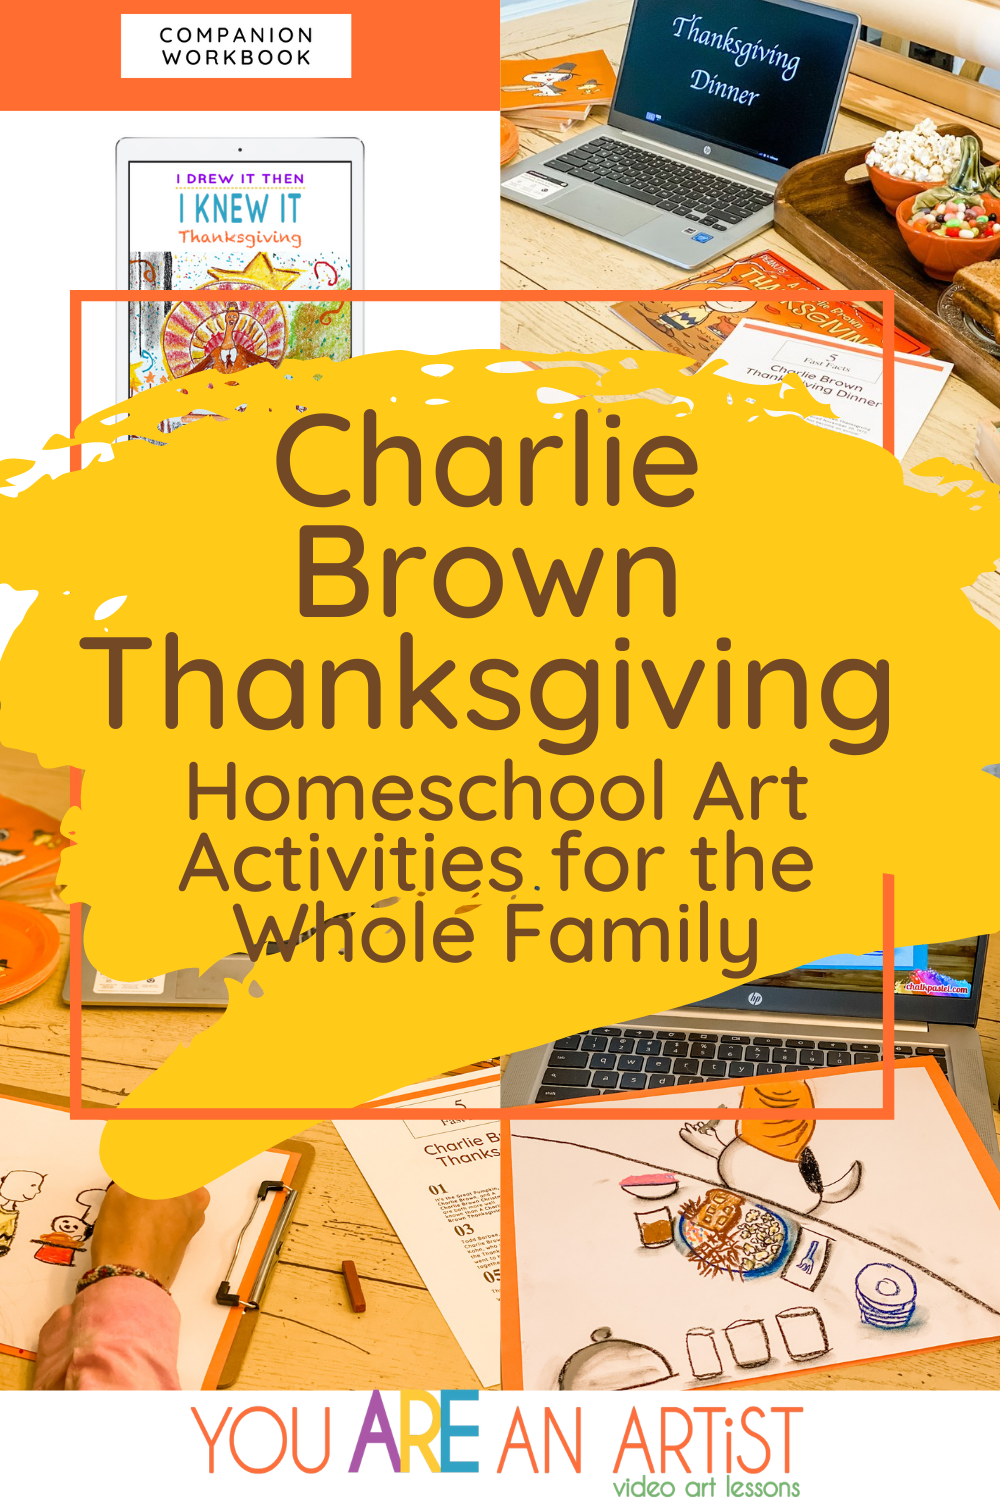 If you love A Charlie Brown Thanksgiving, you will love adding these art activities as a new tradition in your homeschool too. #charliebrown #thanksgiving #homeschoolart #homeschoolartactivities